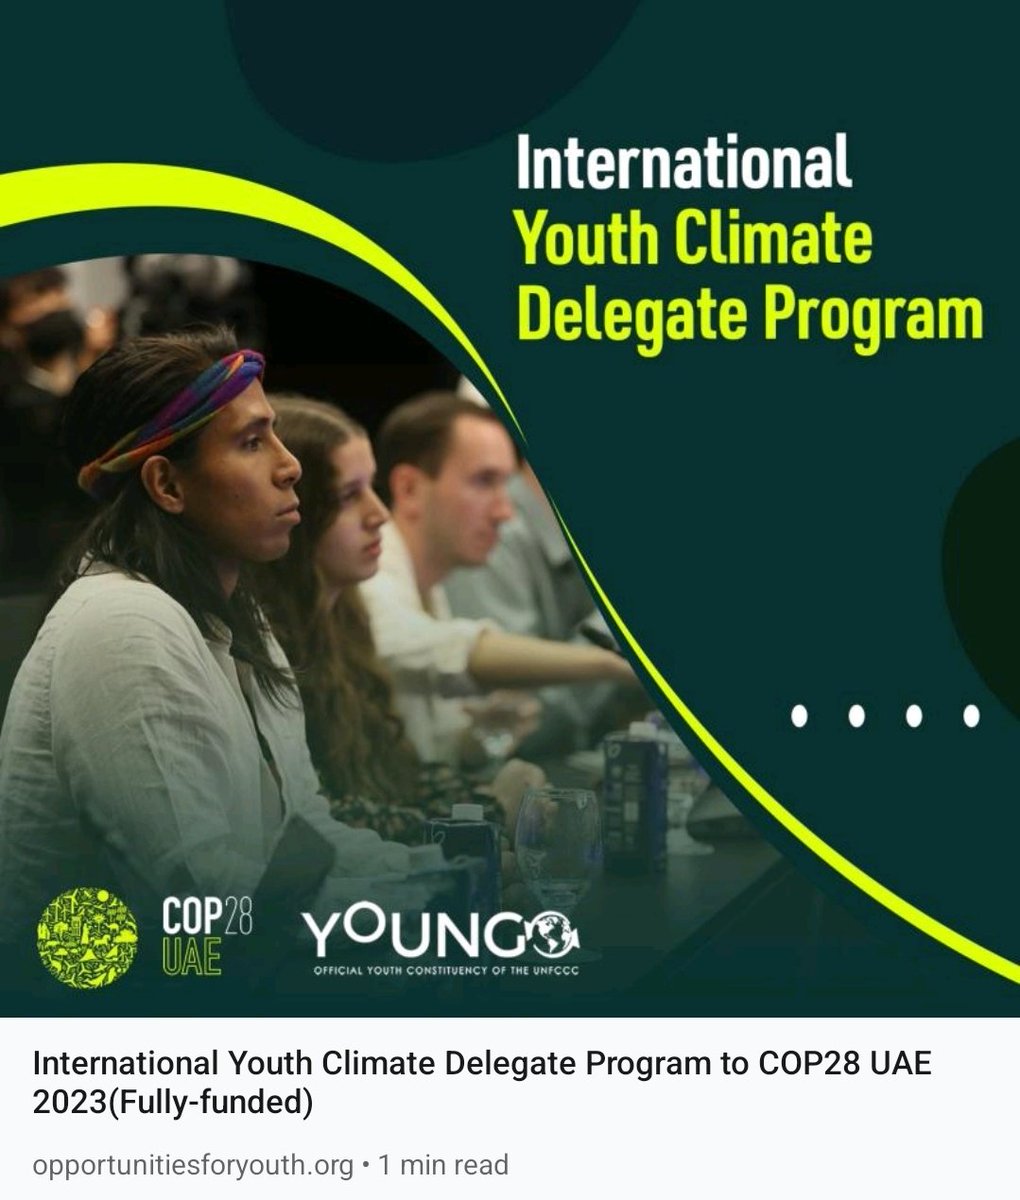 Youth are at the forefront of #ClimateChange & must be at the heart of response ✊

 #YouthClimateDelegate Program by @cop28uaeofficial and @youngo will meaningfully engage 1⃣0⃣0⃣ youth in climate negotiations

Link  bit.ly/3nBXeFG 

#cop28uae #people #uae #youth